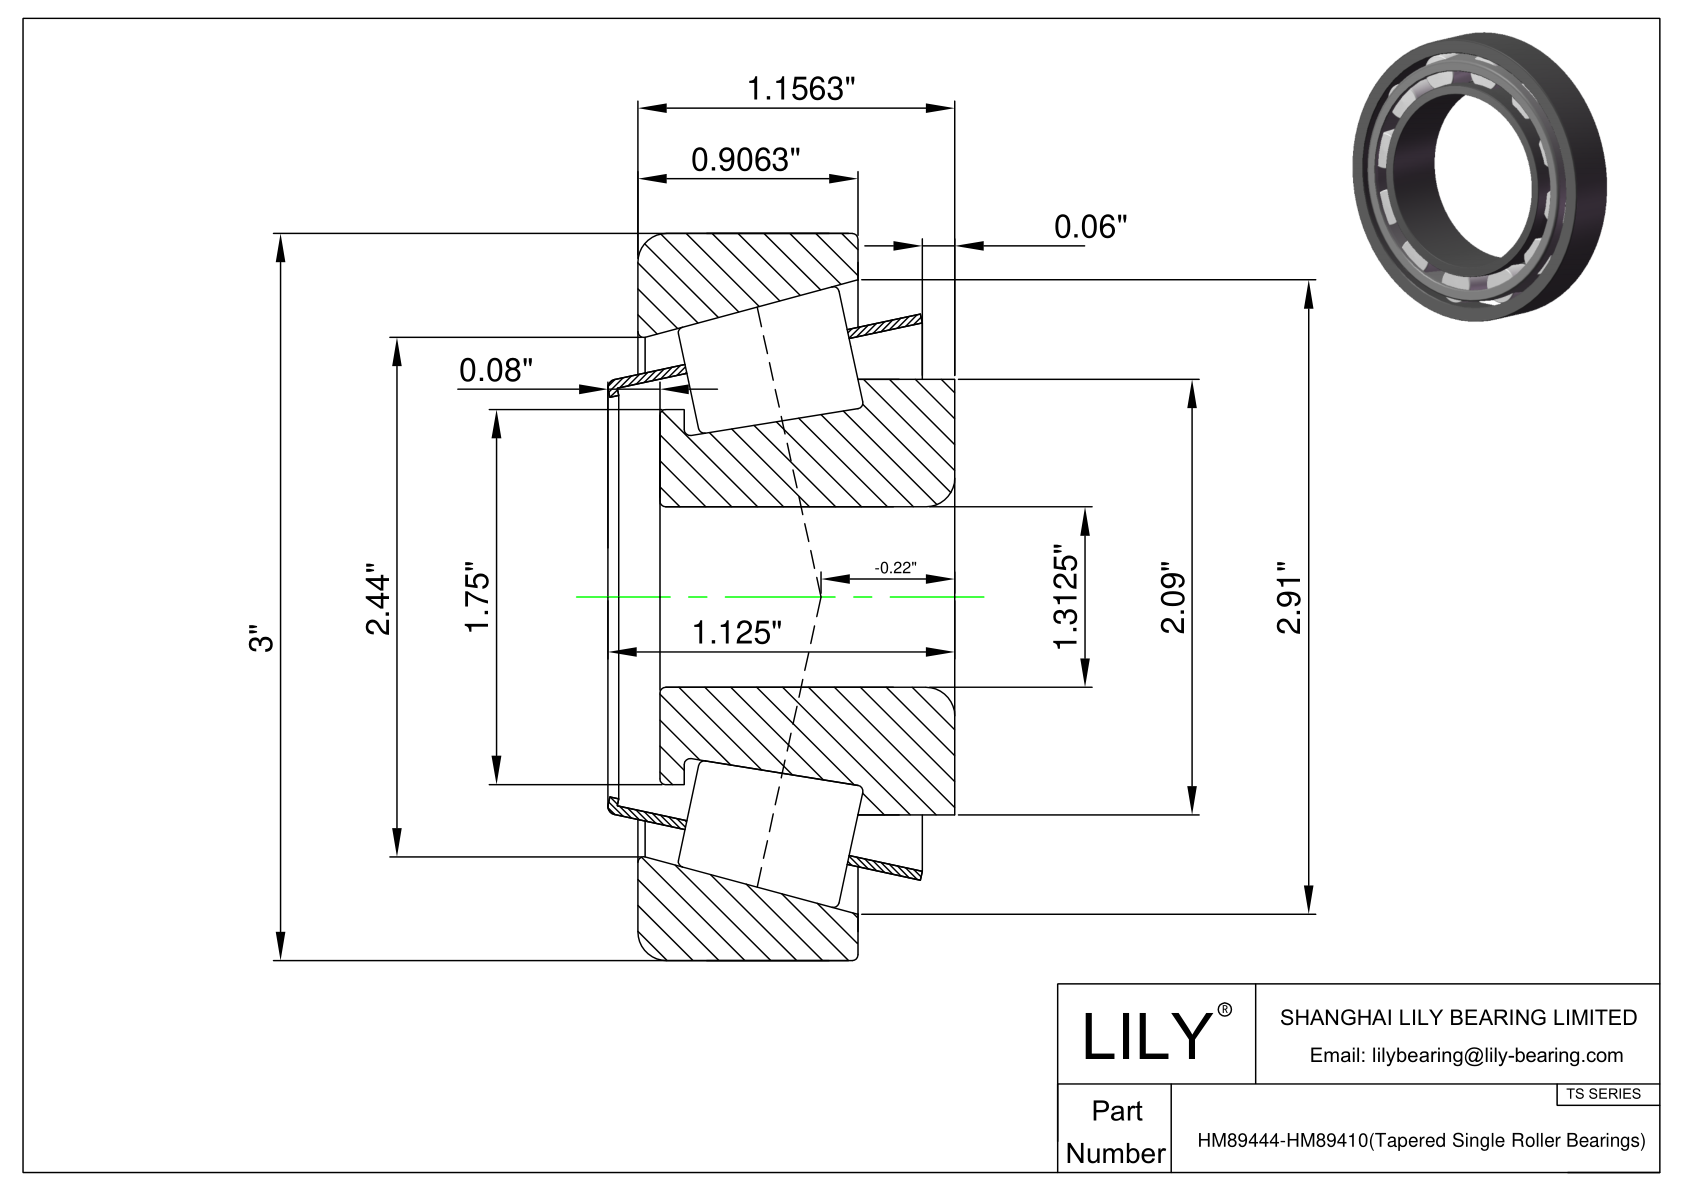 HM89444-HM89410 TS (Tapered Single Roller Bearings) (Imperial) cad drawing